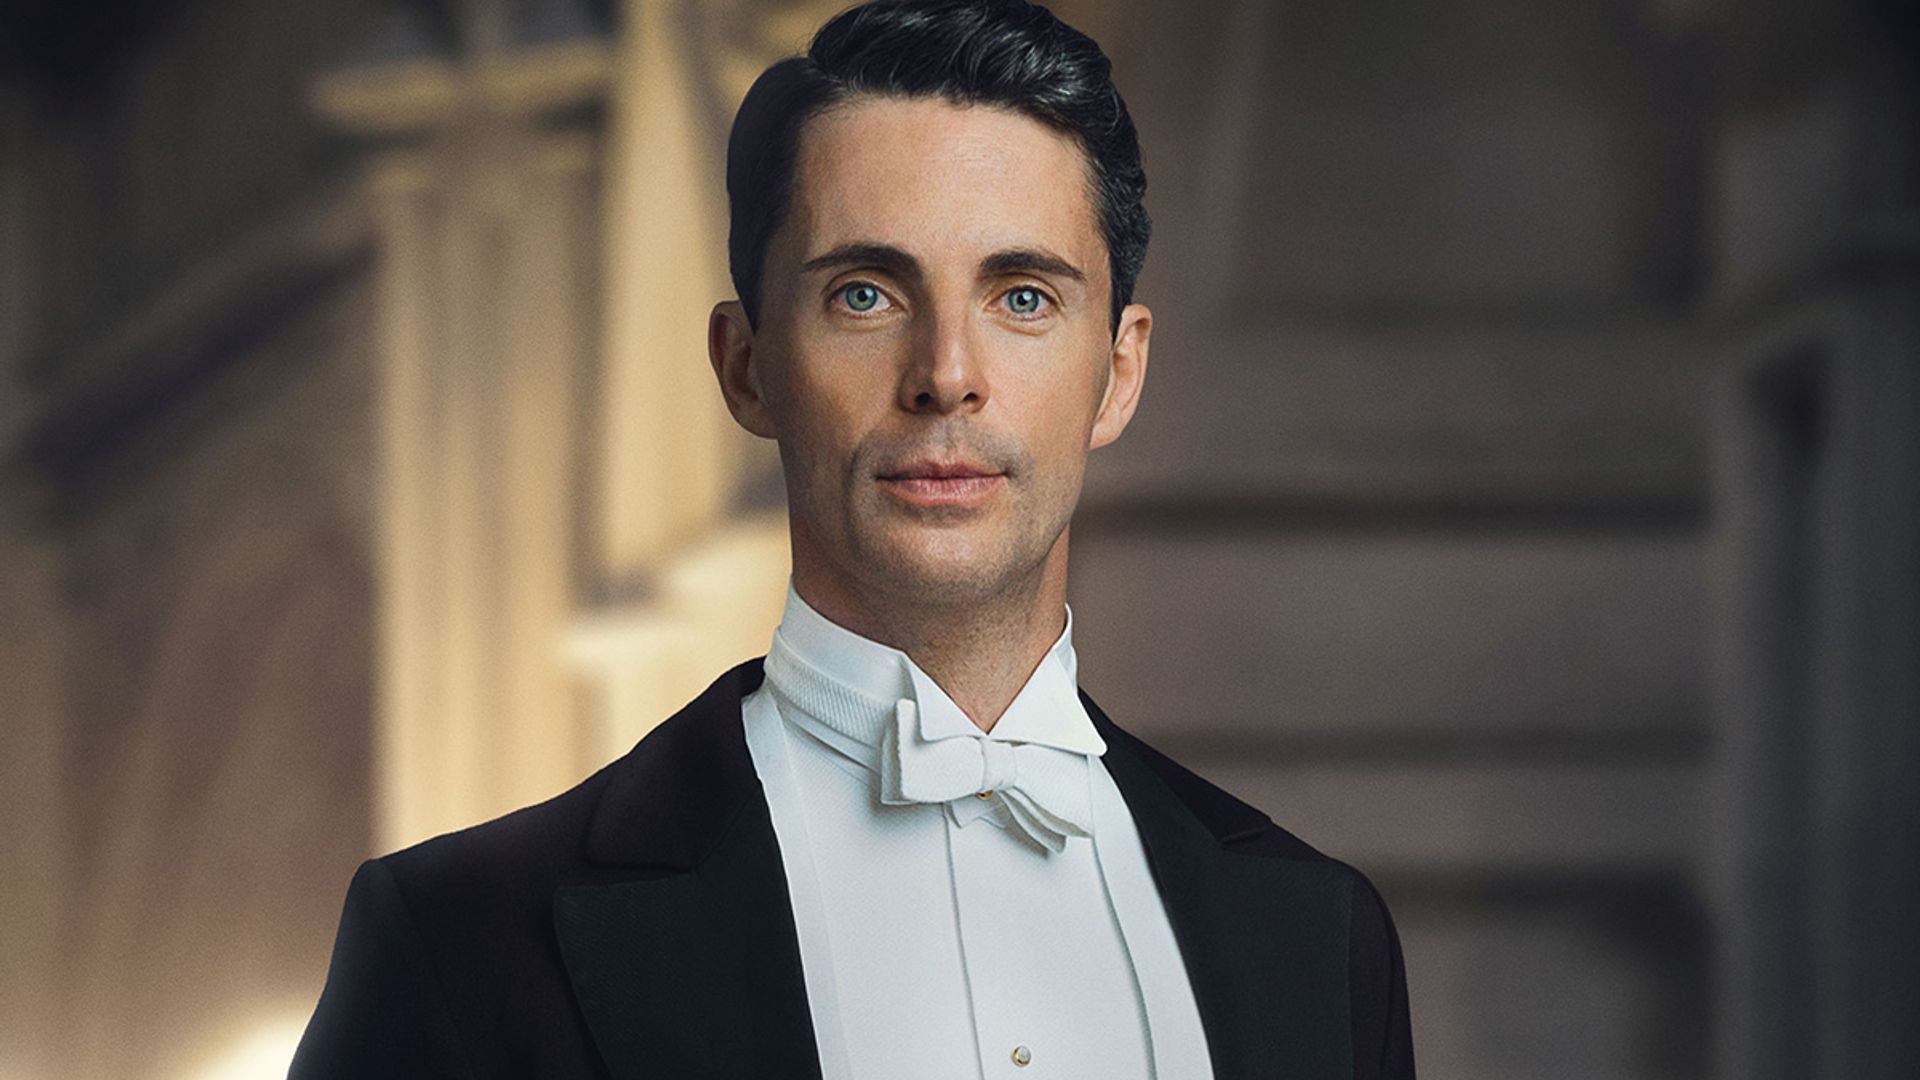 Who is Downton Abbey star Matthew Goode married to?